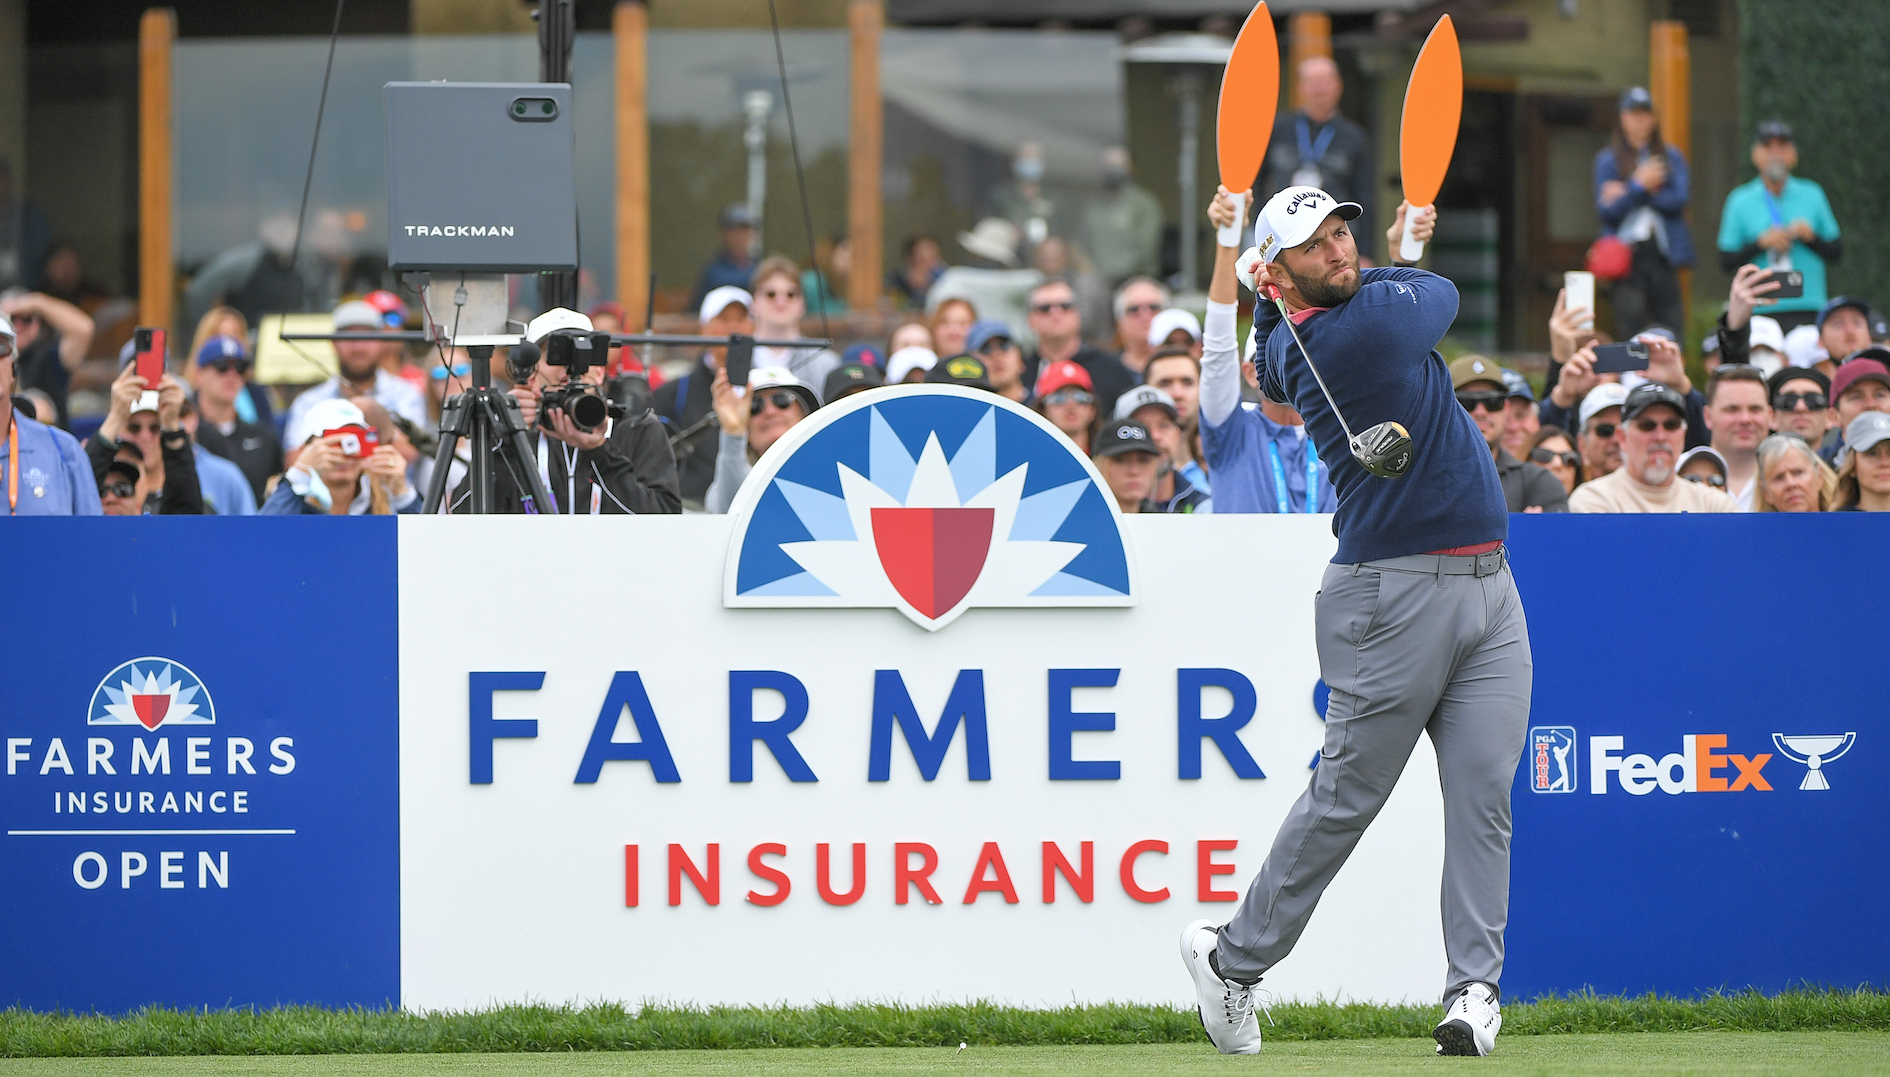 The Preview Farmers Insurance Open